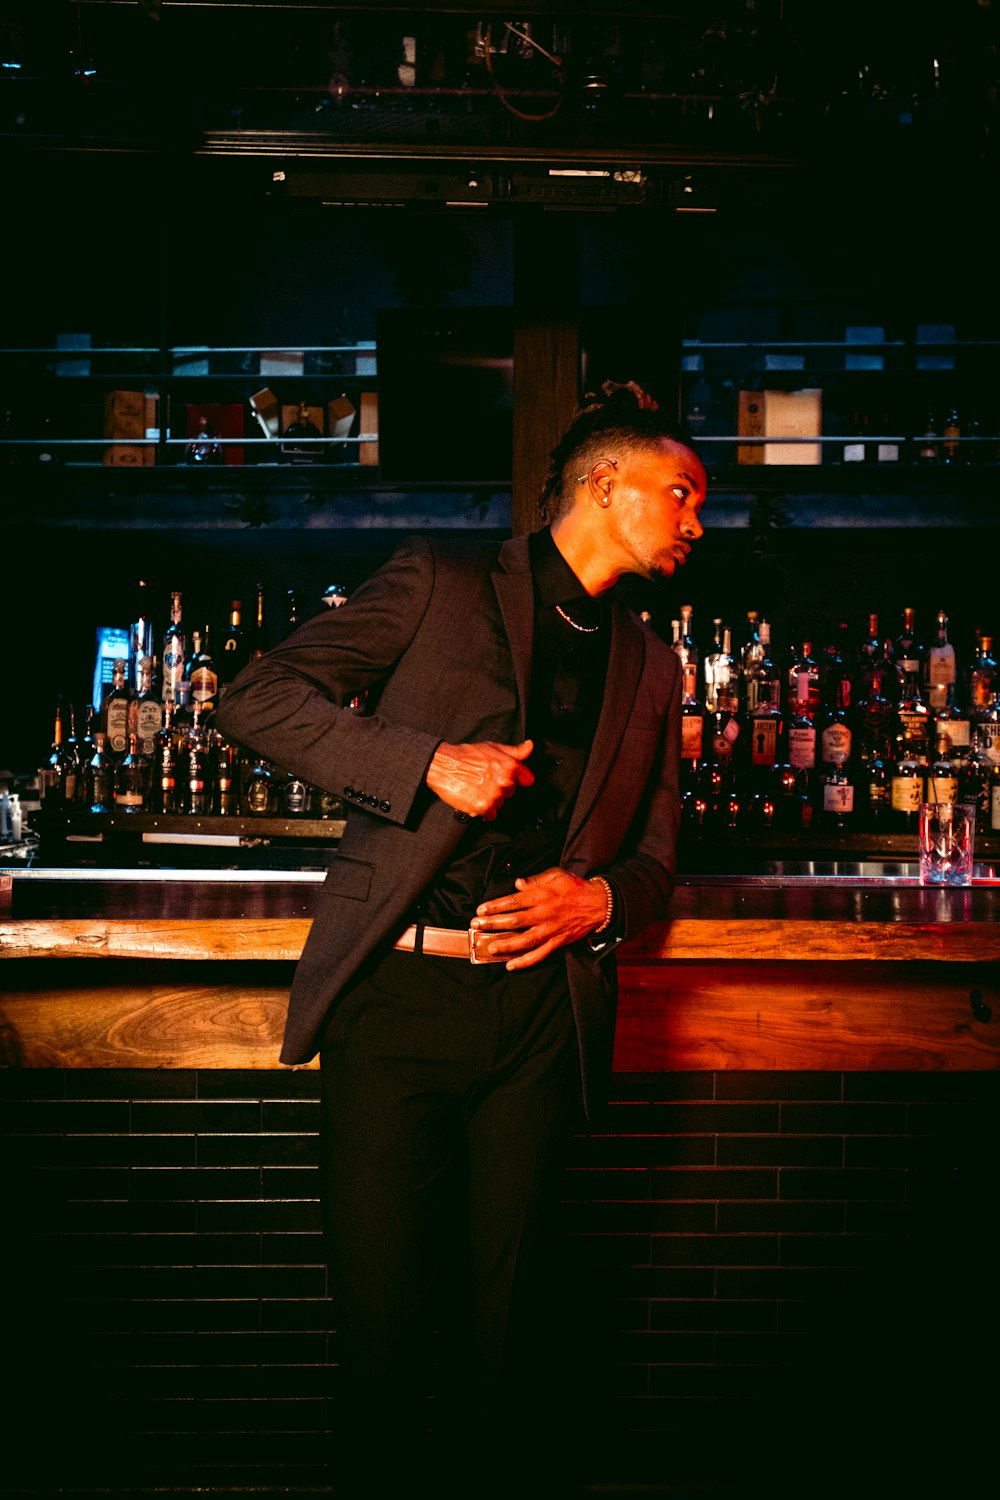 man in black suit standing near bar counter